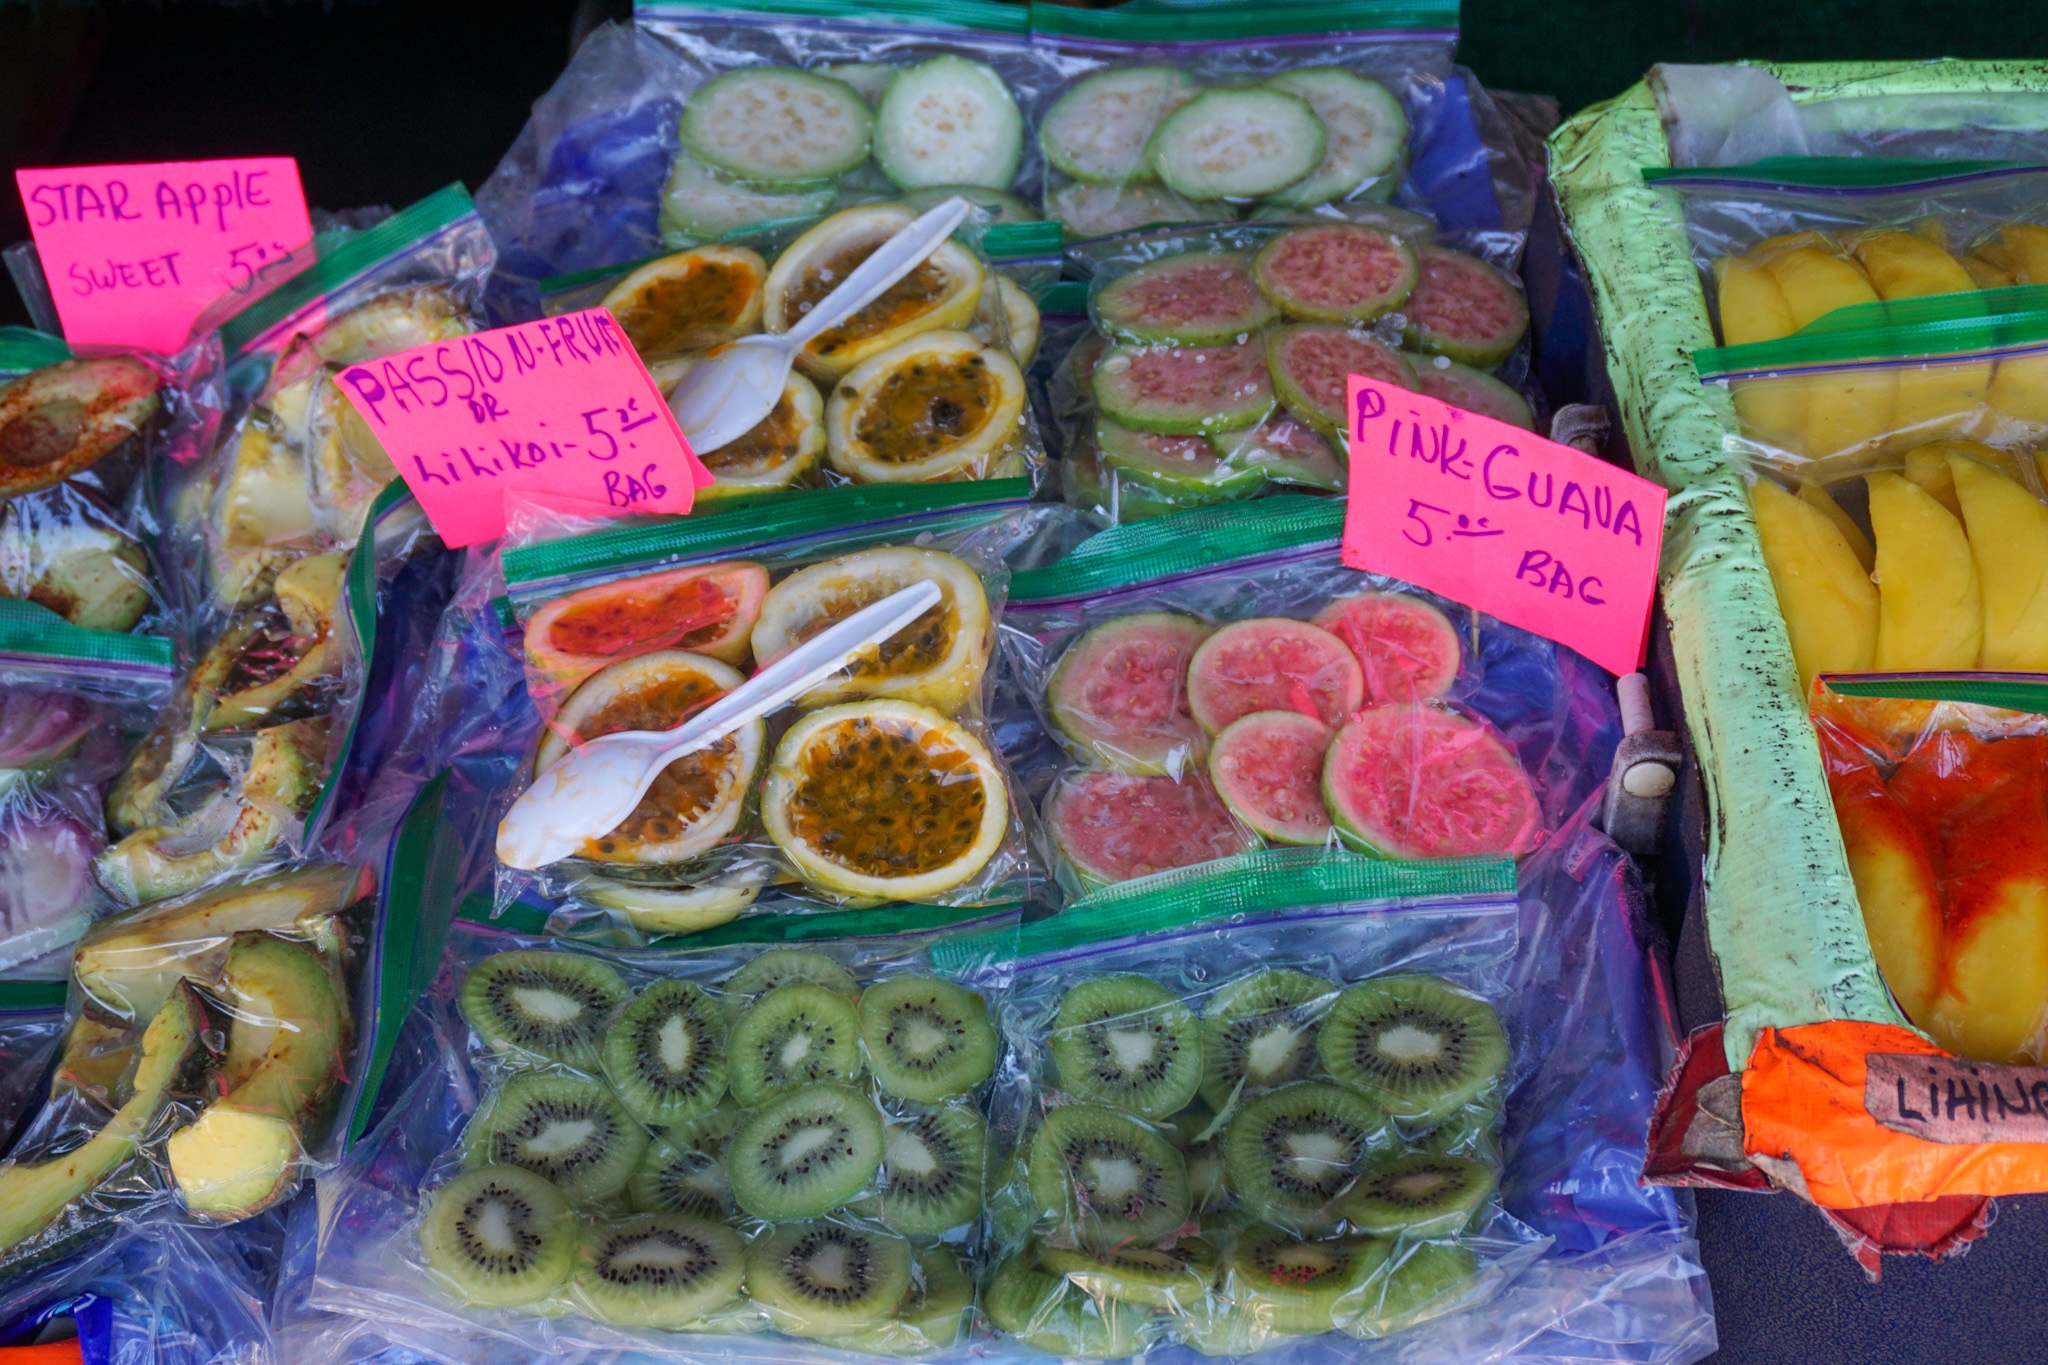 Tropical fruit for sale at Hawaiian farm stand